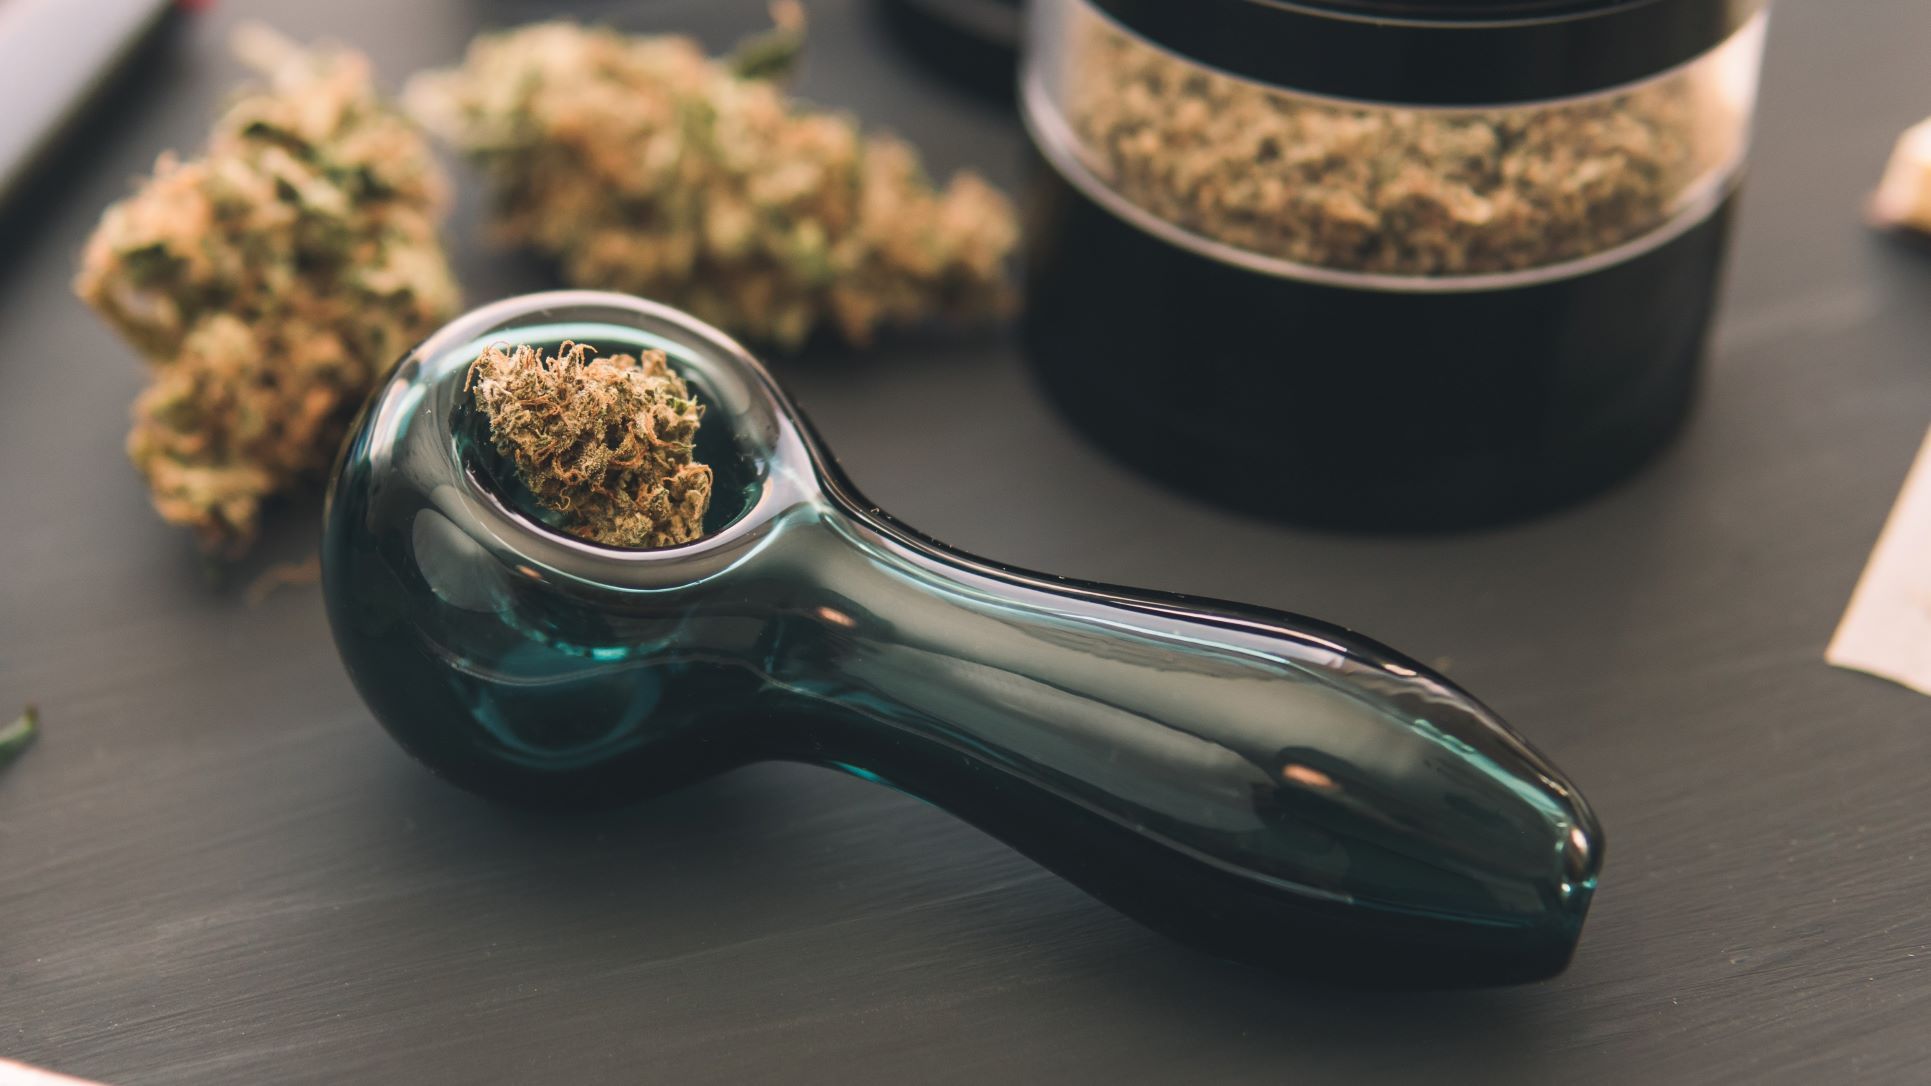 Weed Pipes: 10 Best Smoking Pipes for Weed in 2022